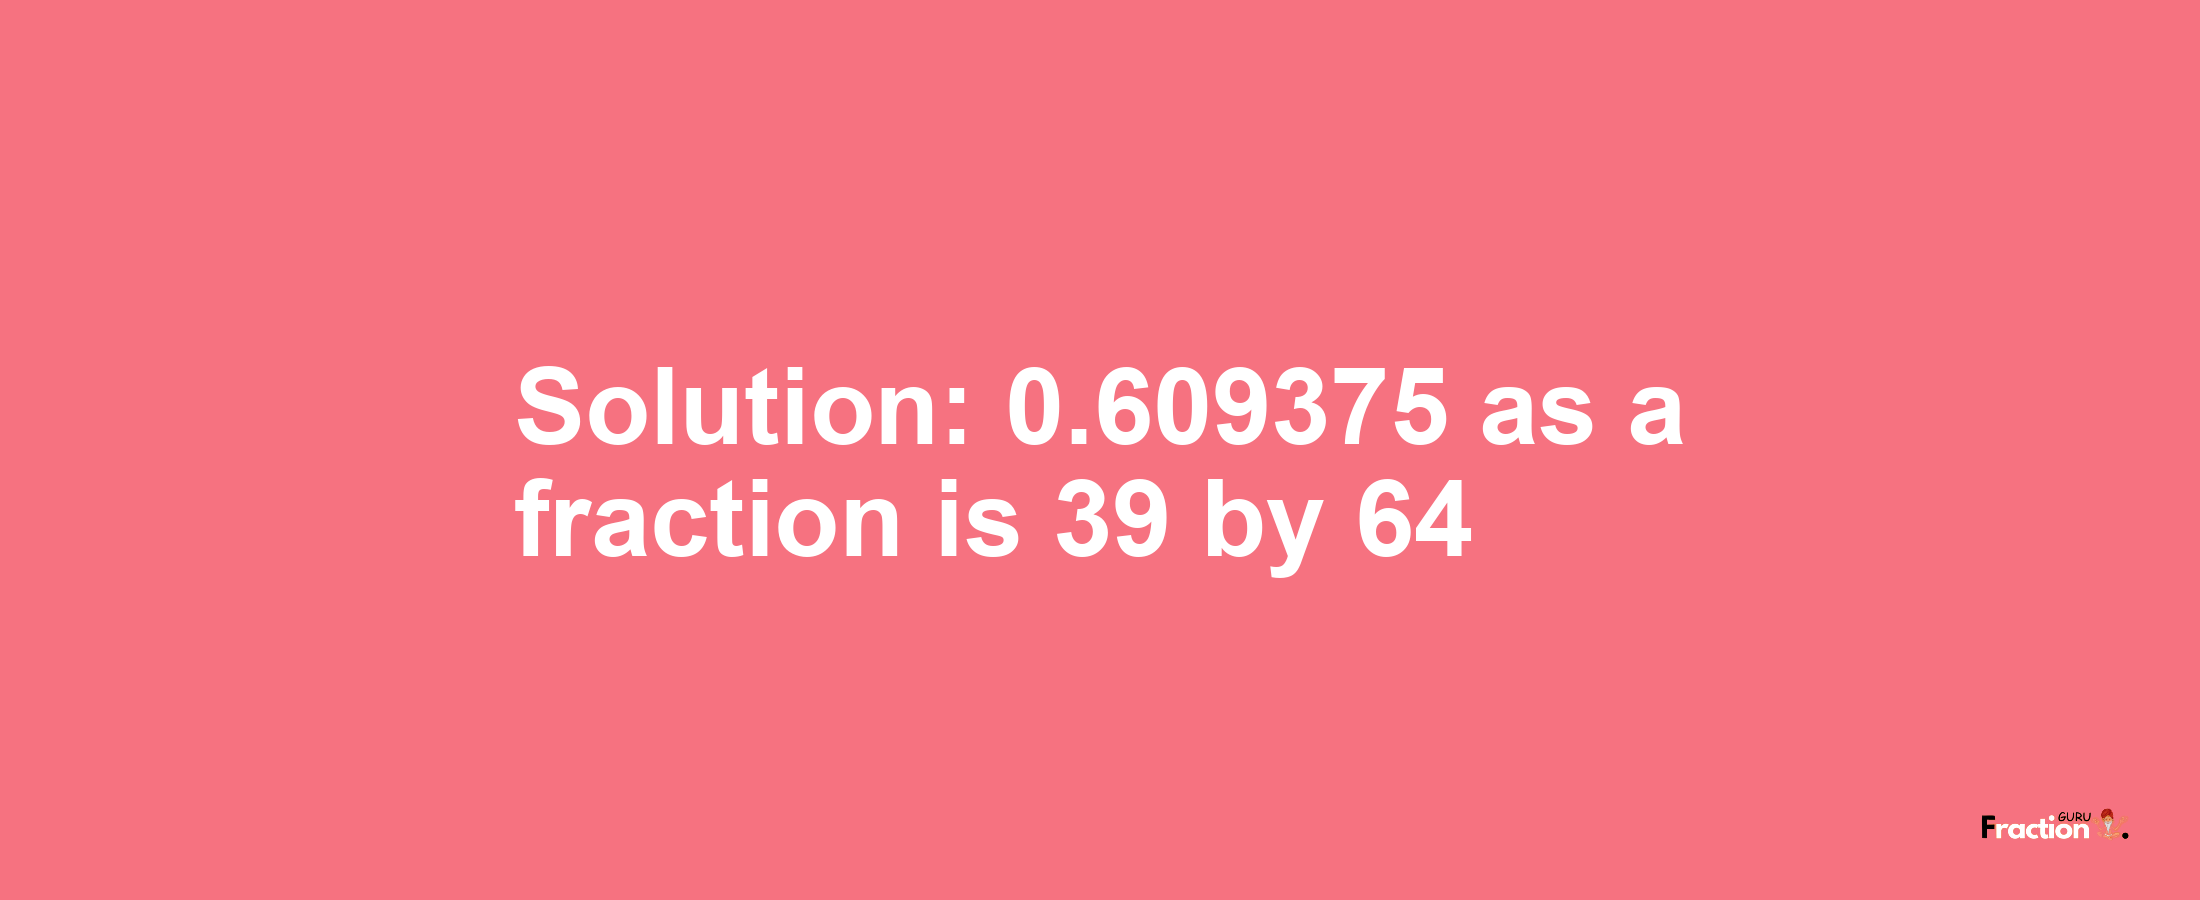 Solution:0.609375 as a fraction is 39/64